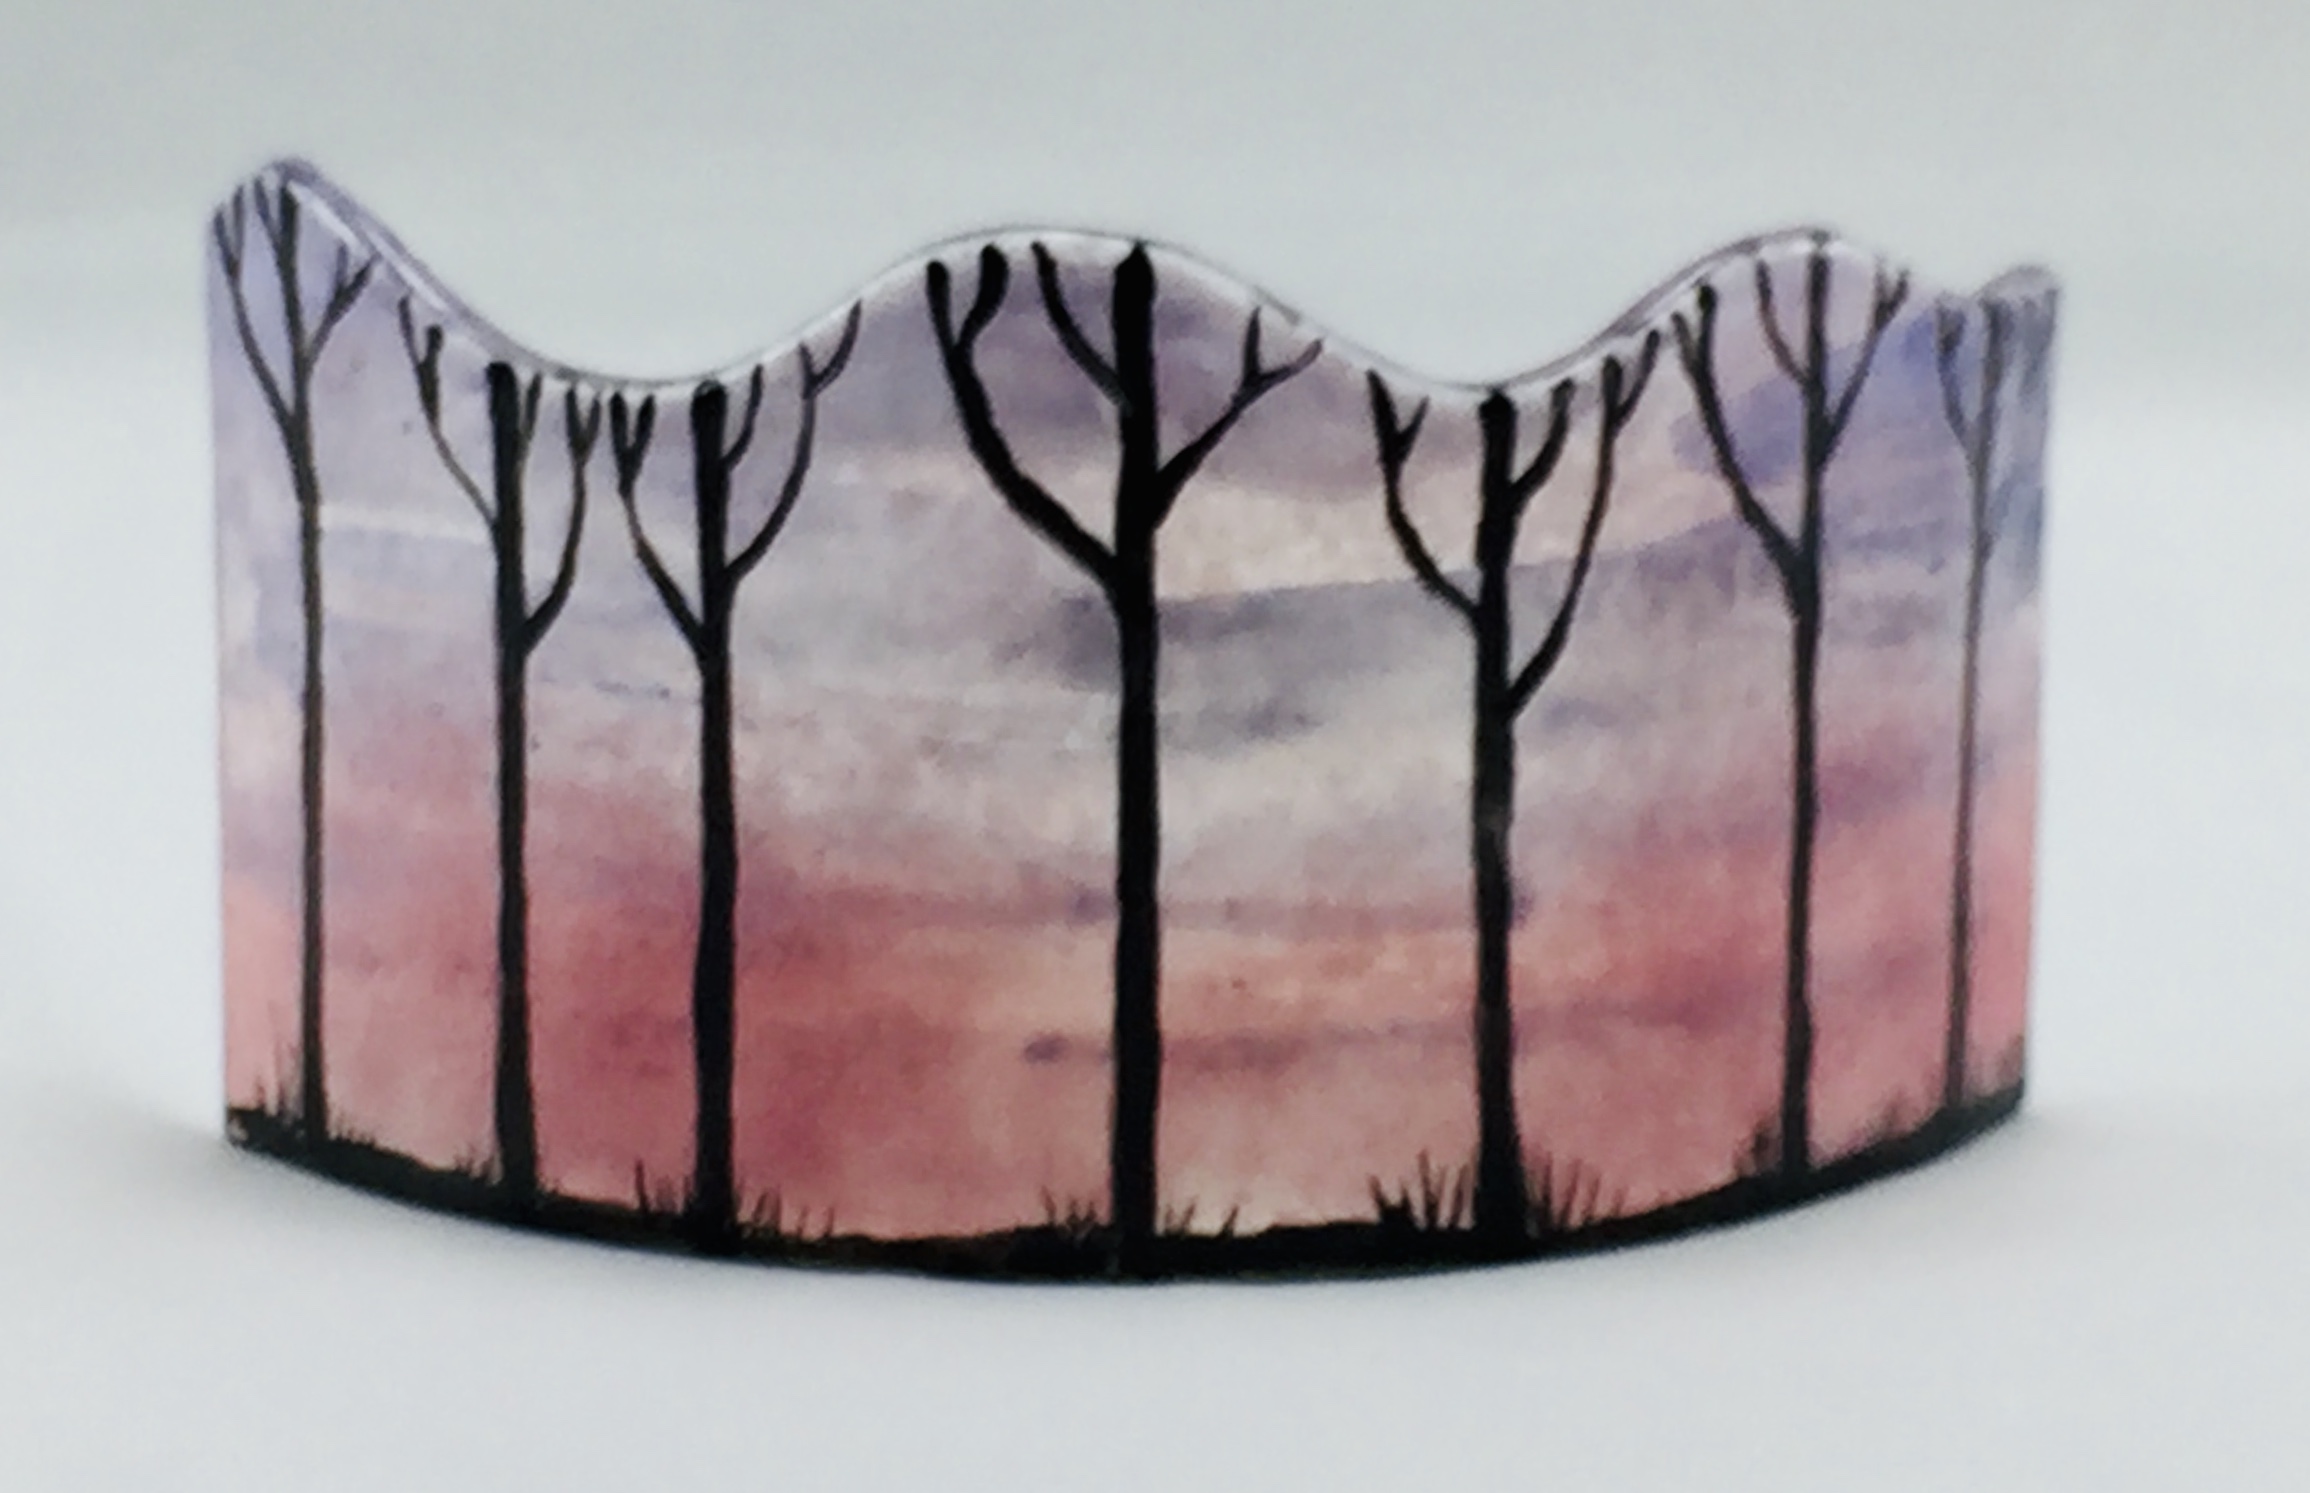 Fused glass mini panel with tree silhouettes on pinkish sunset background